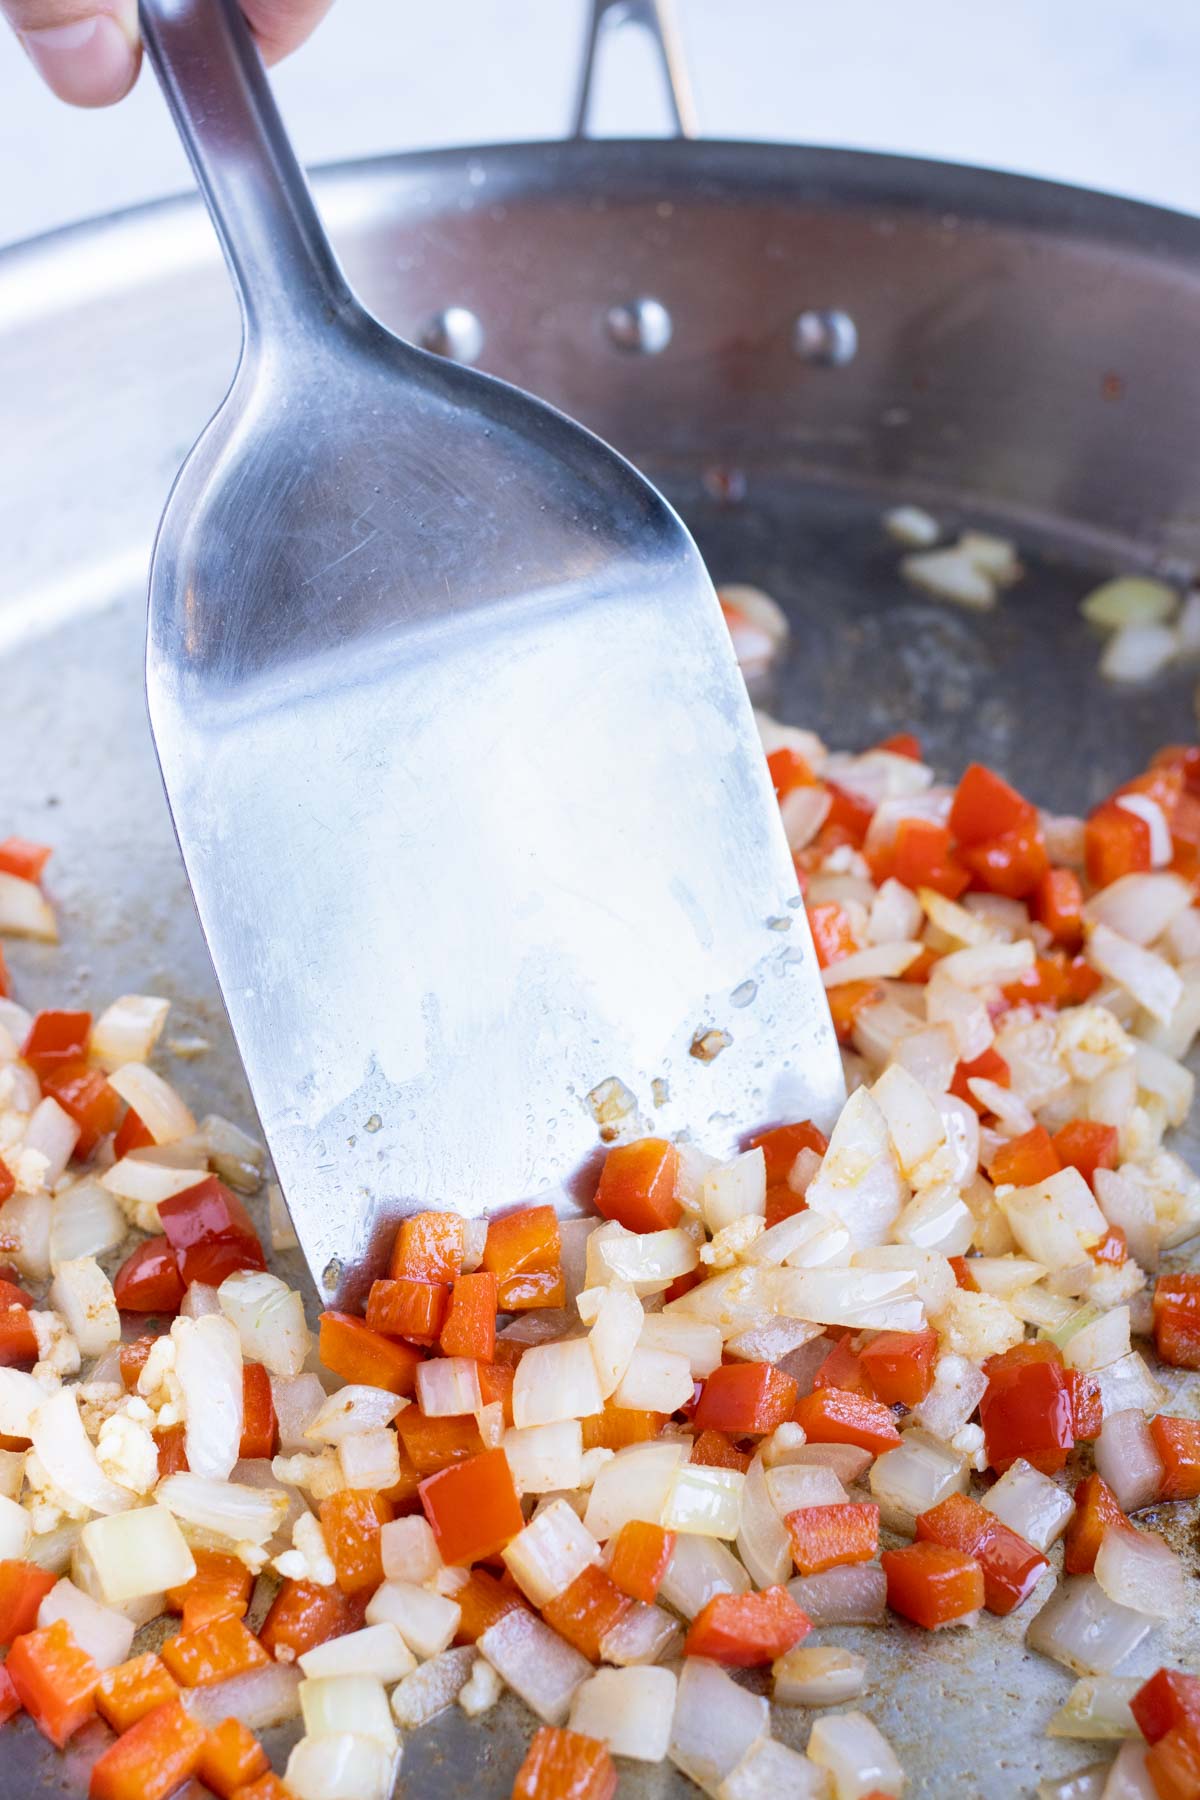 Diced onions and bell peppers are sautèed.